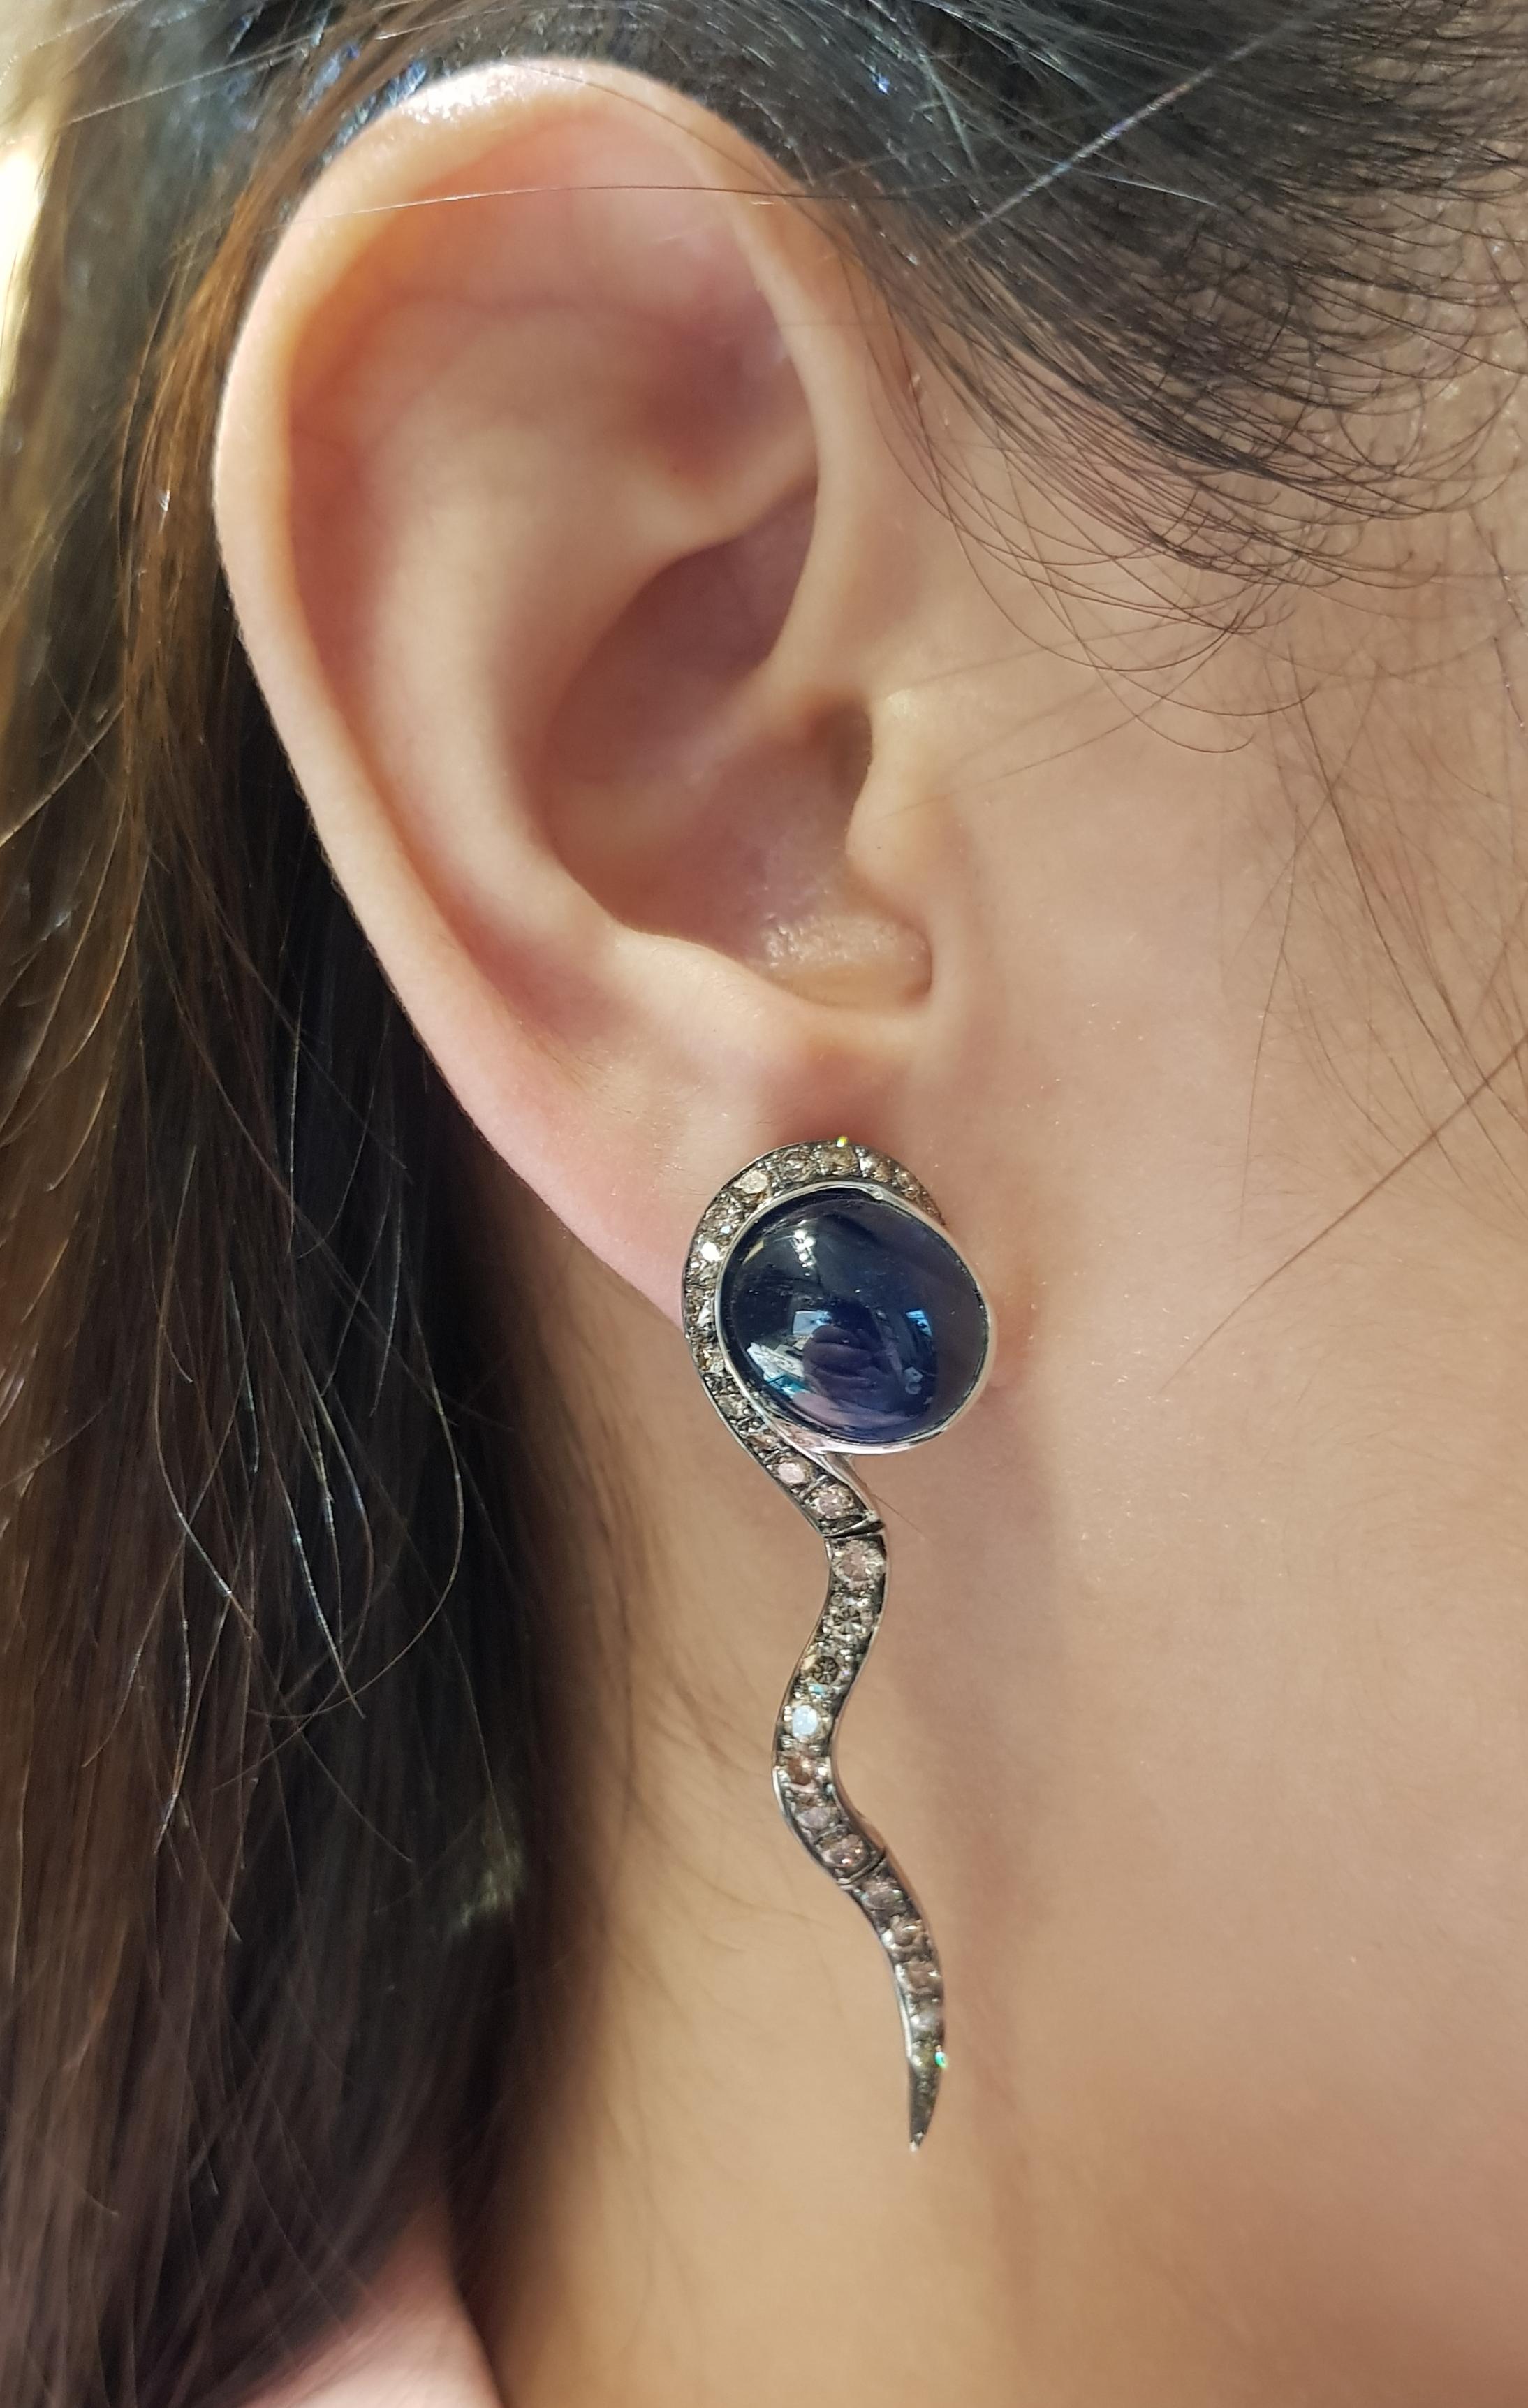 Cabochon Blue Sapphire 18.48 carats with Brown Diamond 1.87 carats Earrings set in 18 Karat White Gold Settings

Width:  1.5 cm 
Length:  5.2 cm
Total Weight: 15.3 grams

